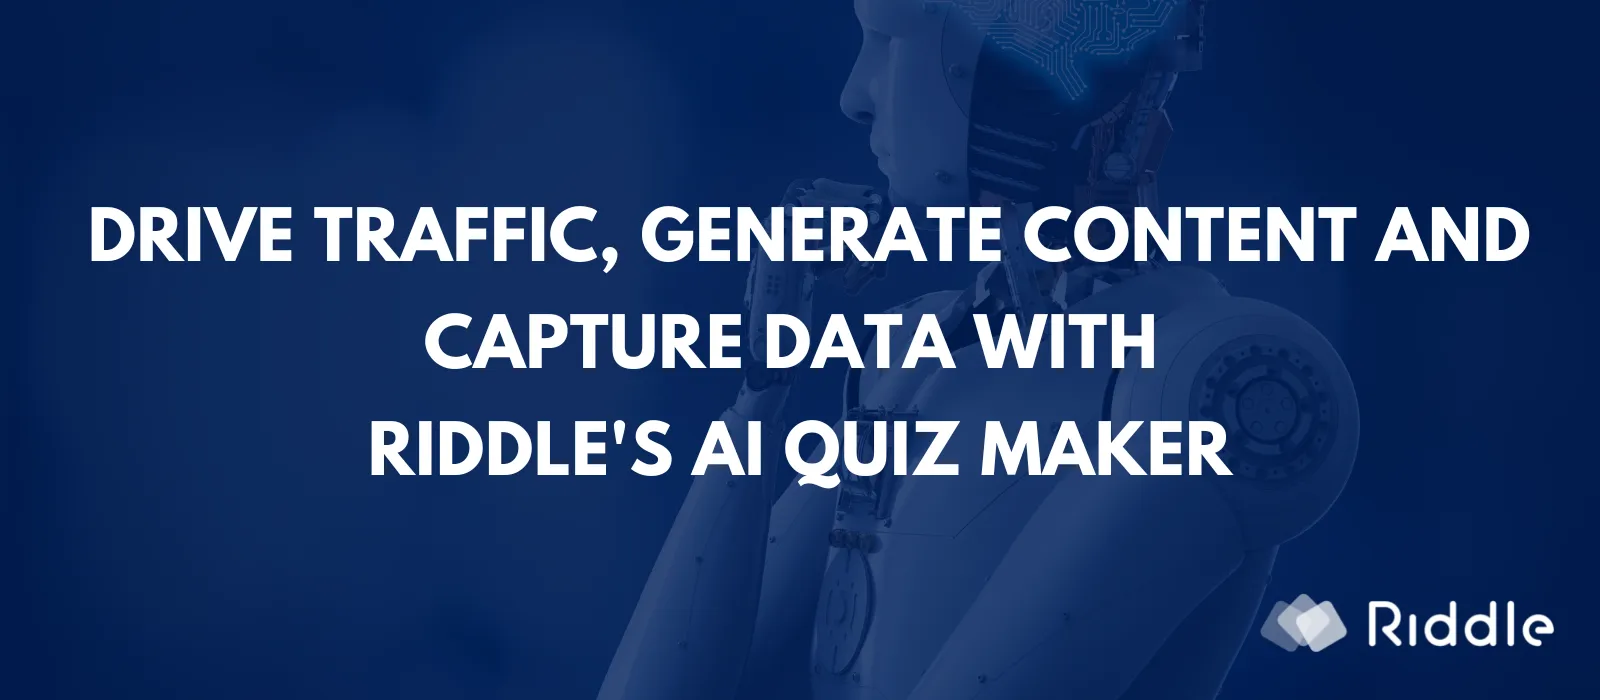 Drive traffic, generate content and capture data with Riddle's AI quiz maker